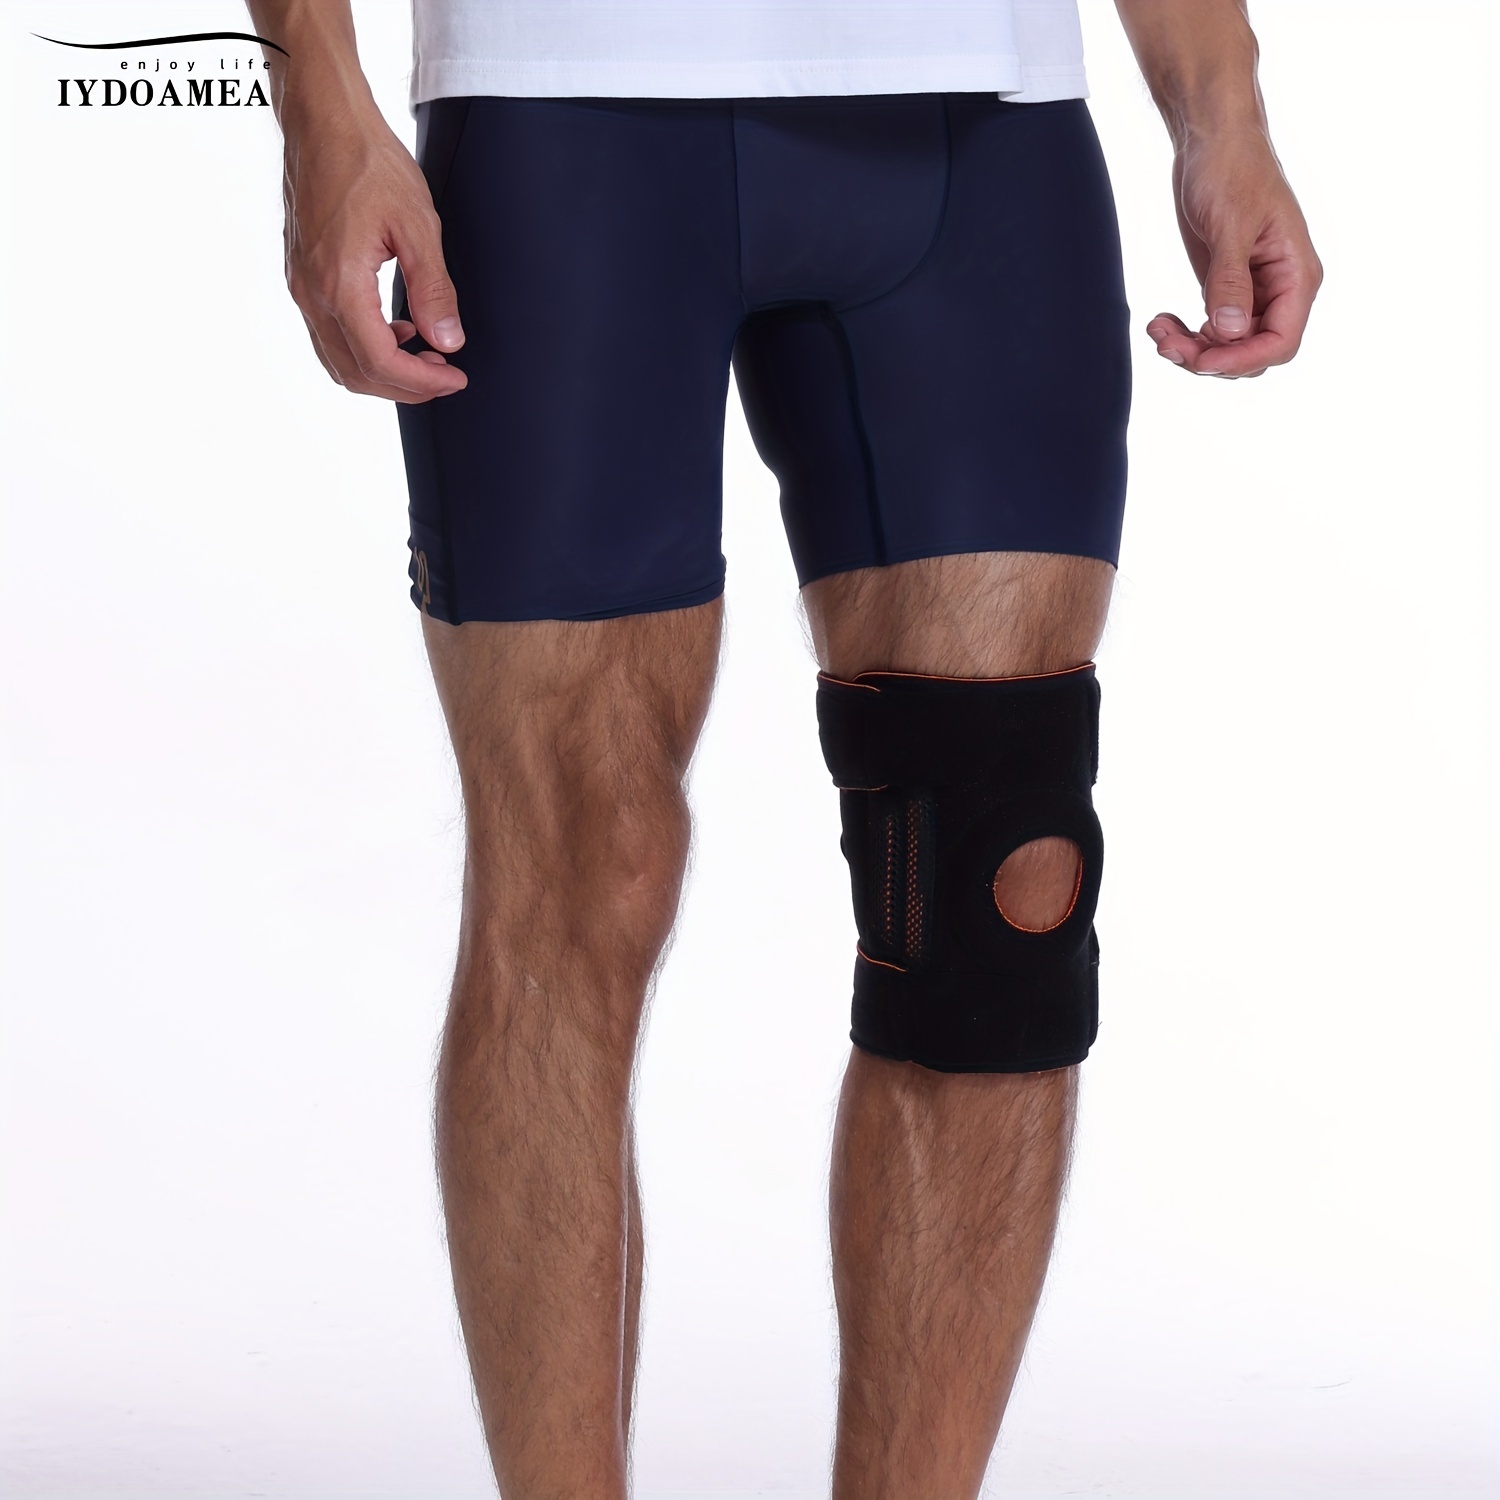 Dropship Knee Brace With Side Stabilizers & Patella Gel Pads